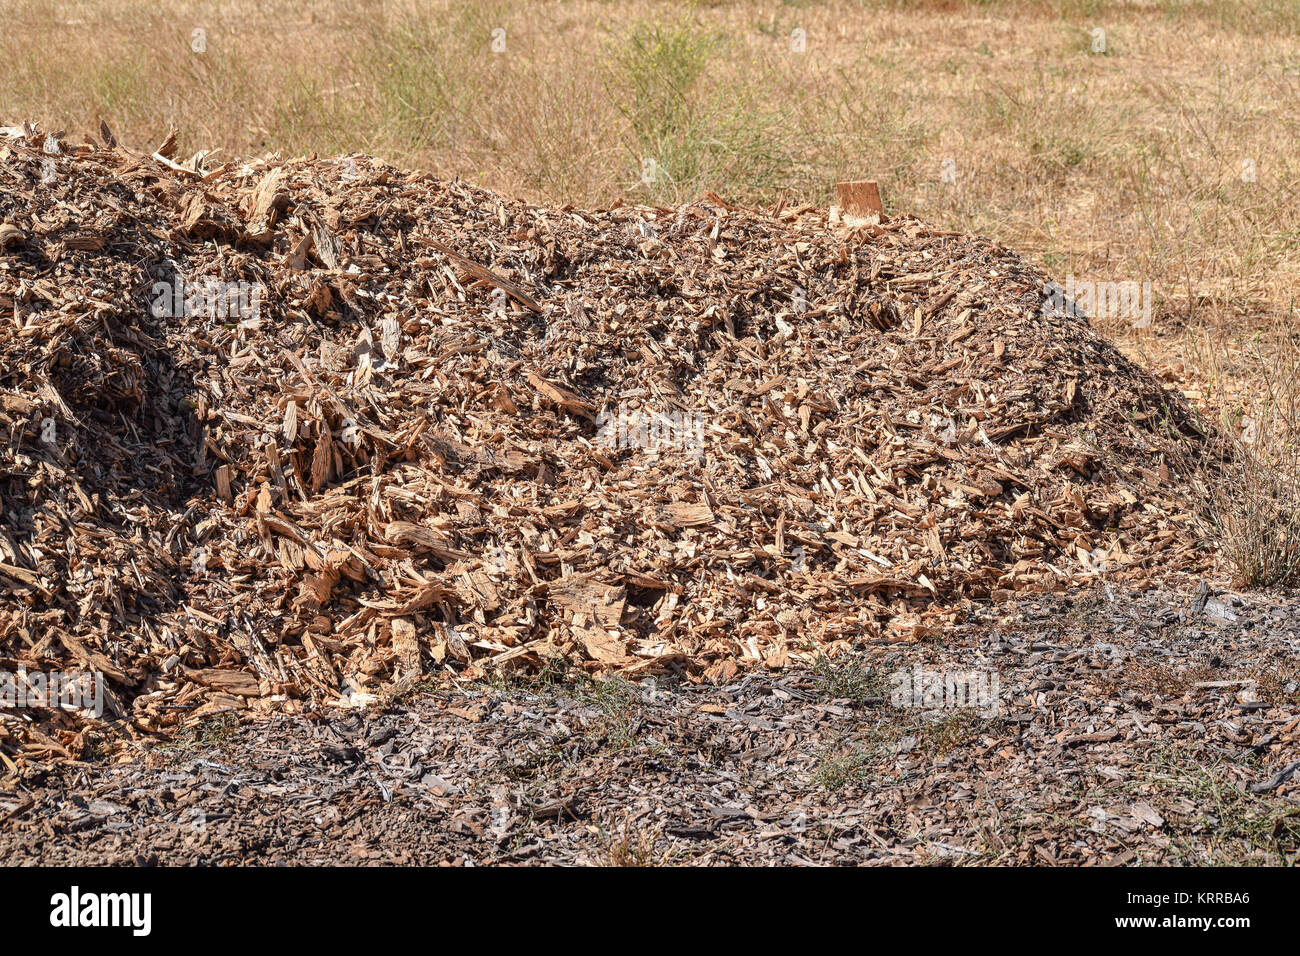 Isolated, close-up of a mulch pile, with bits of wood shavings and some grass, in the background Stock Photo